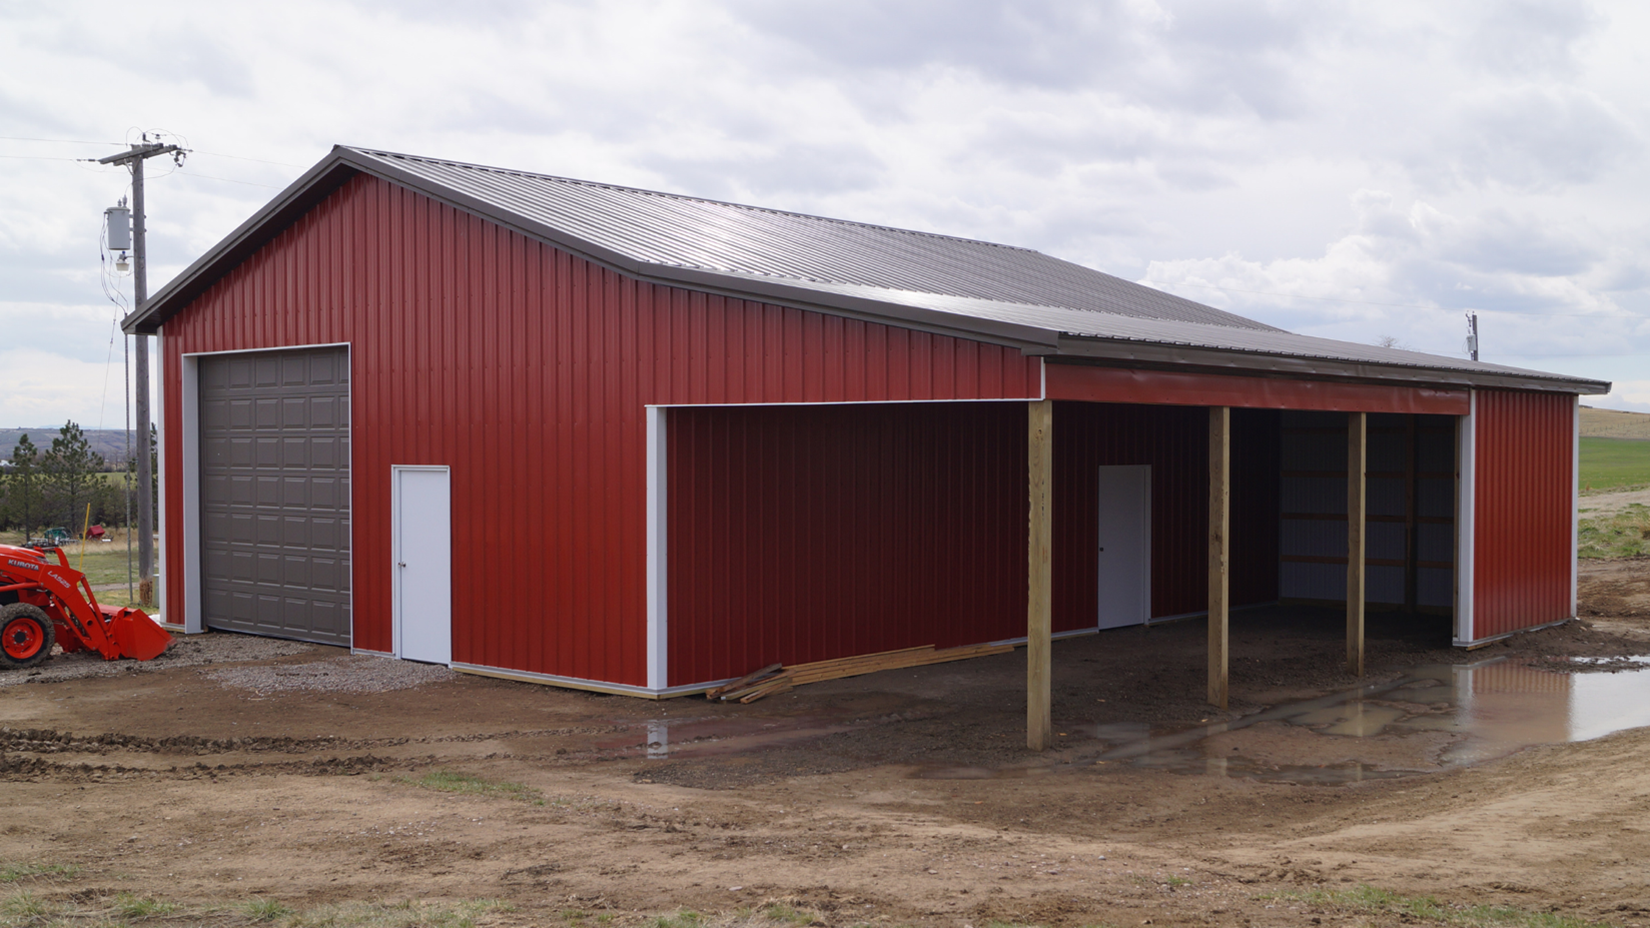 How to Make the Most of the Space in Your Barn or Garage in Montana